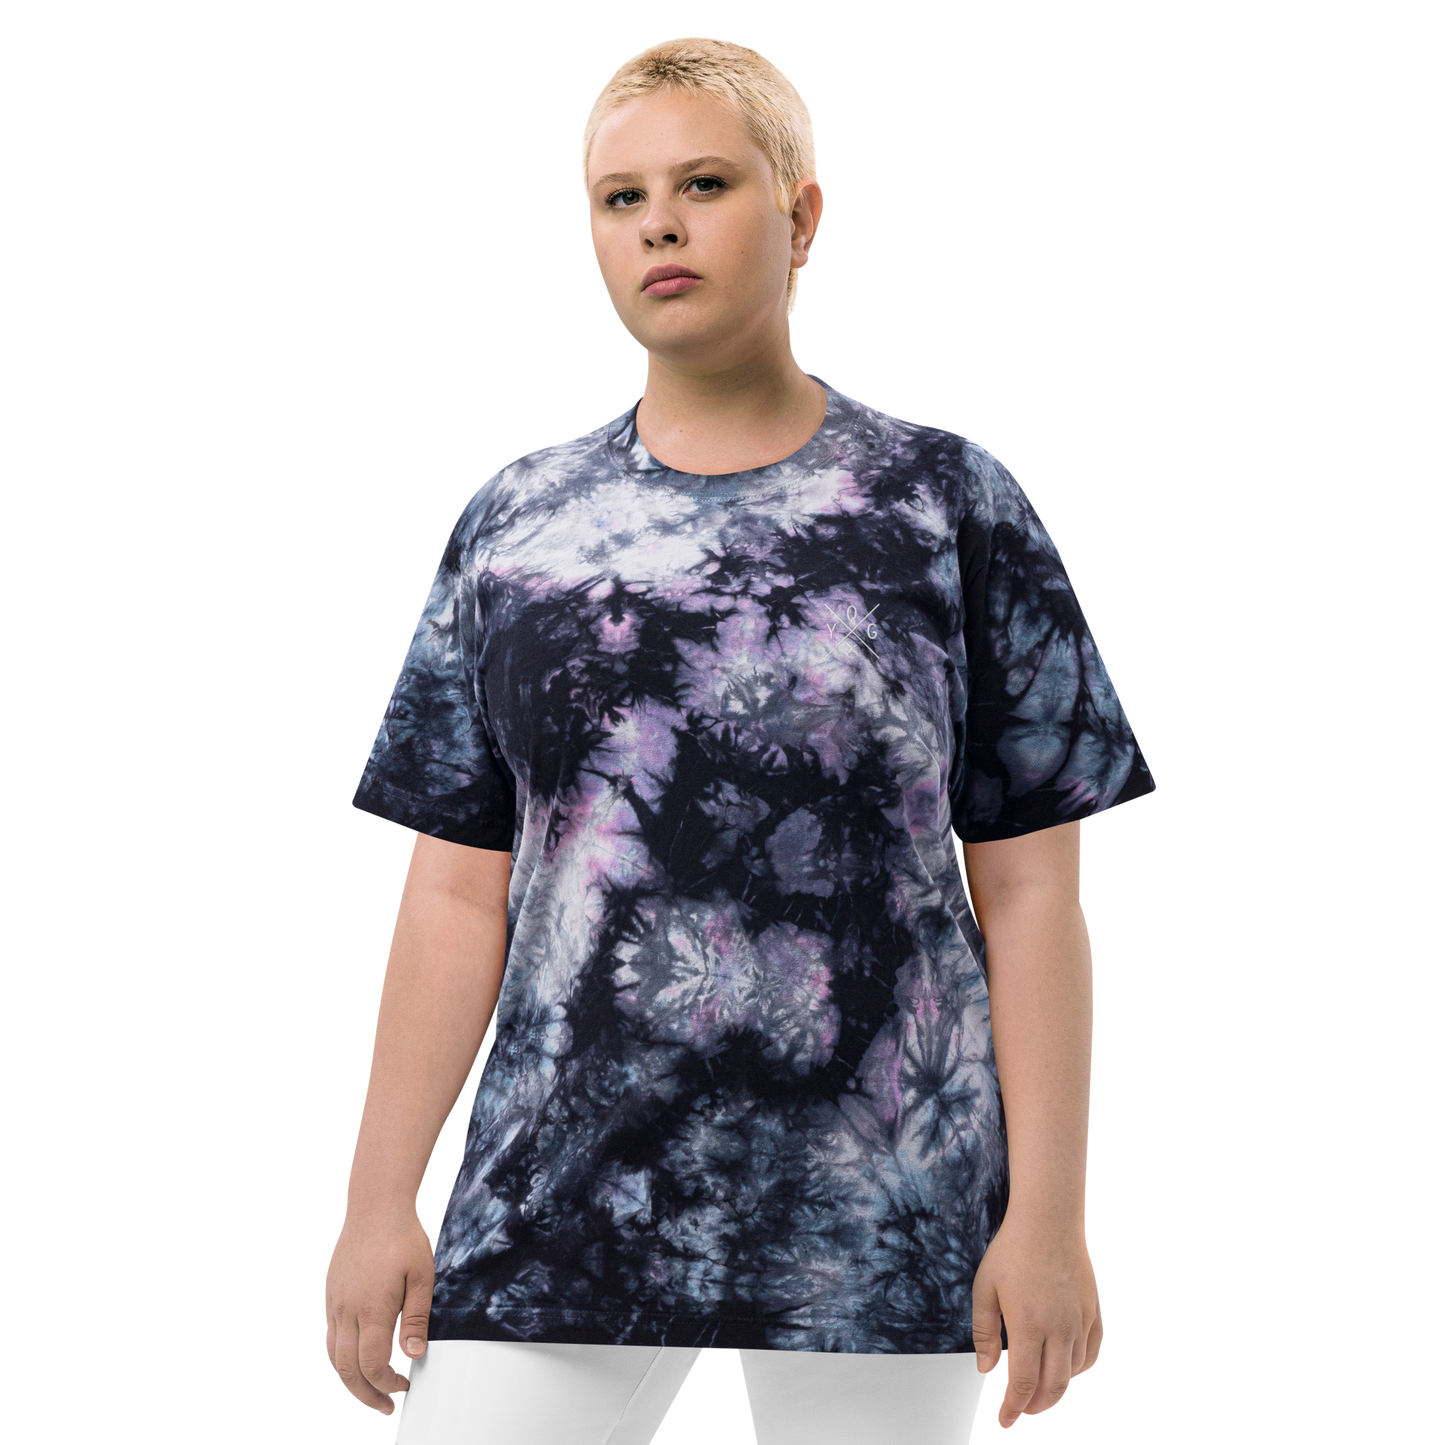 YHM Designs - YQG Windsor Oversized Tie-Dye T-Shirt - Crossed-X Design with Airport Code and Vintage Propliner - White Embroidery - Image 05